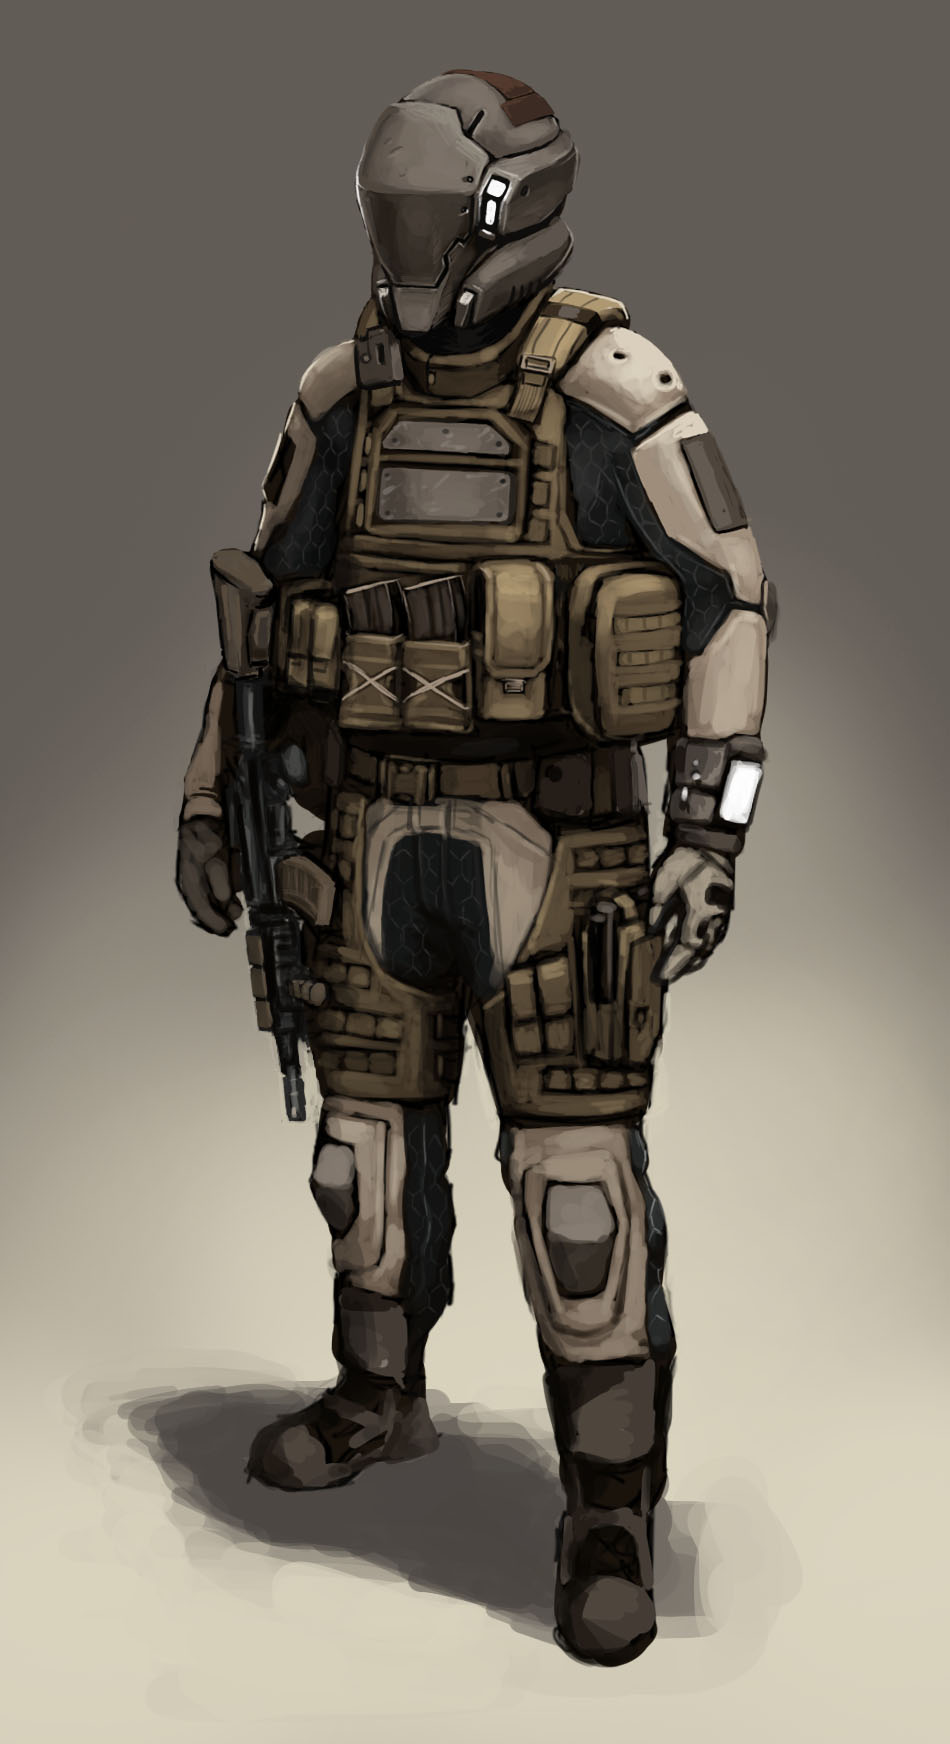 futuristic_soldier_concept_by_fonteart-d619yk8.jpg